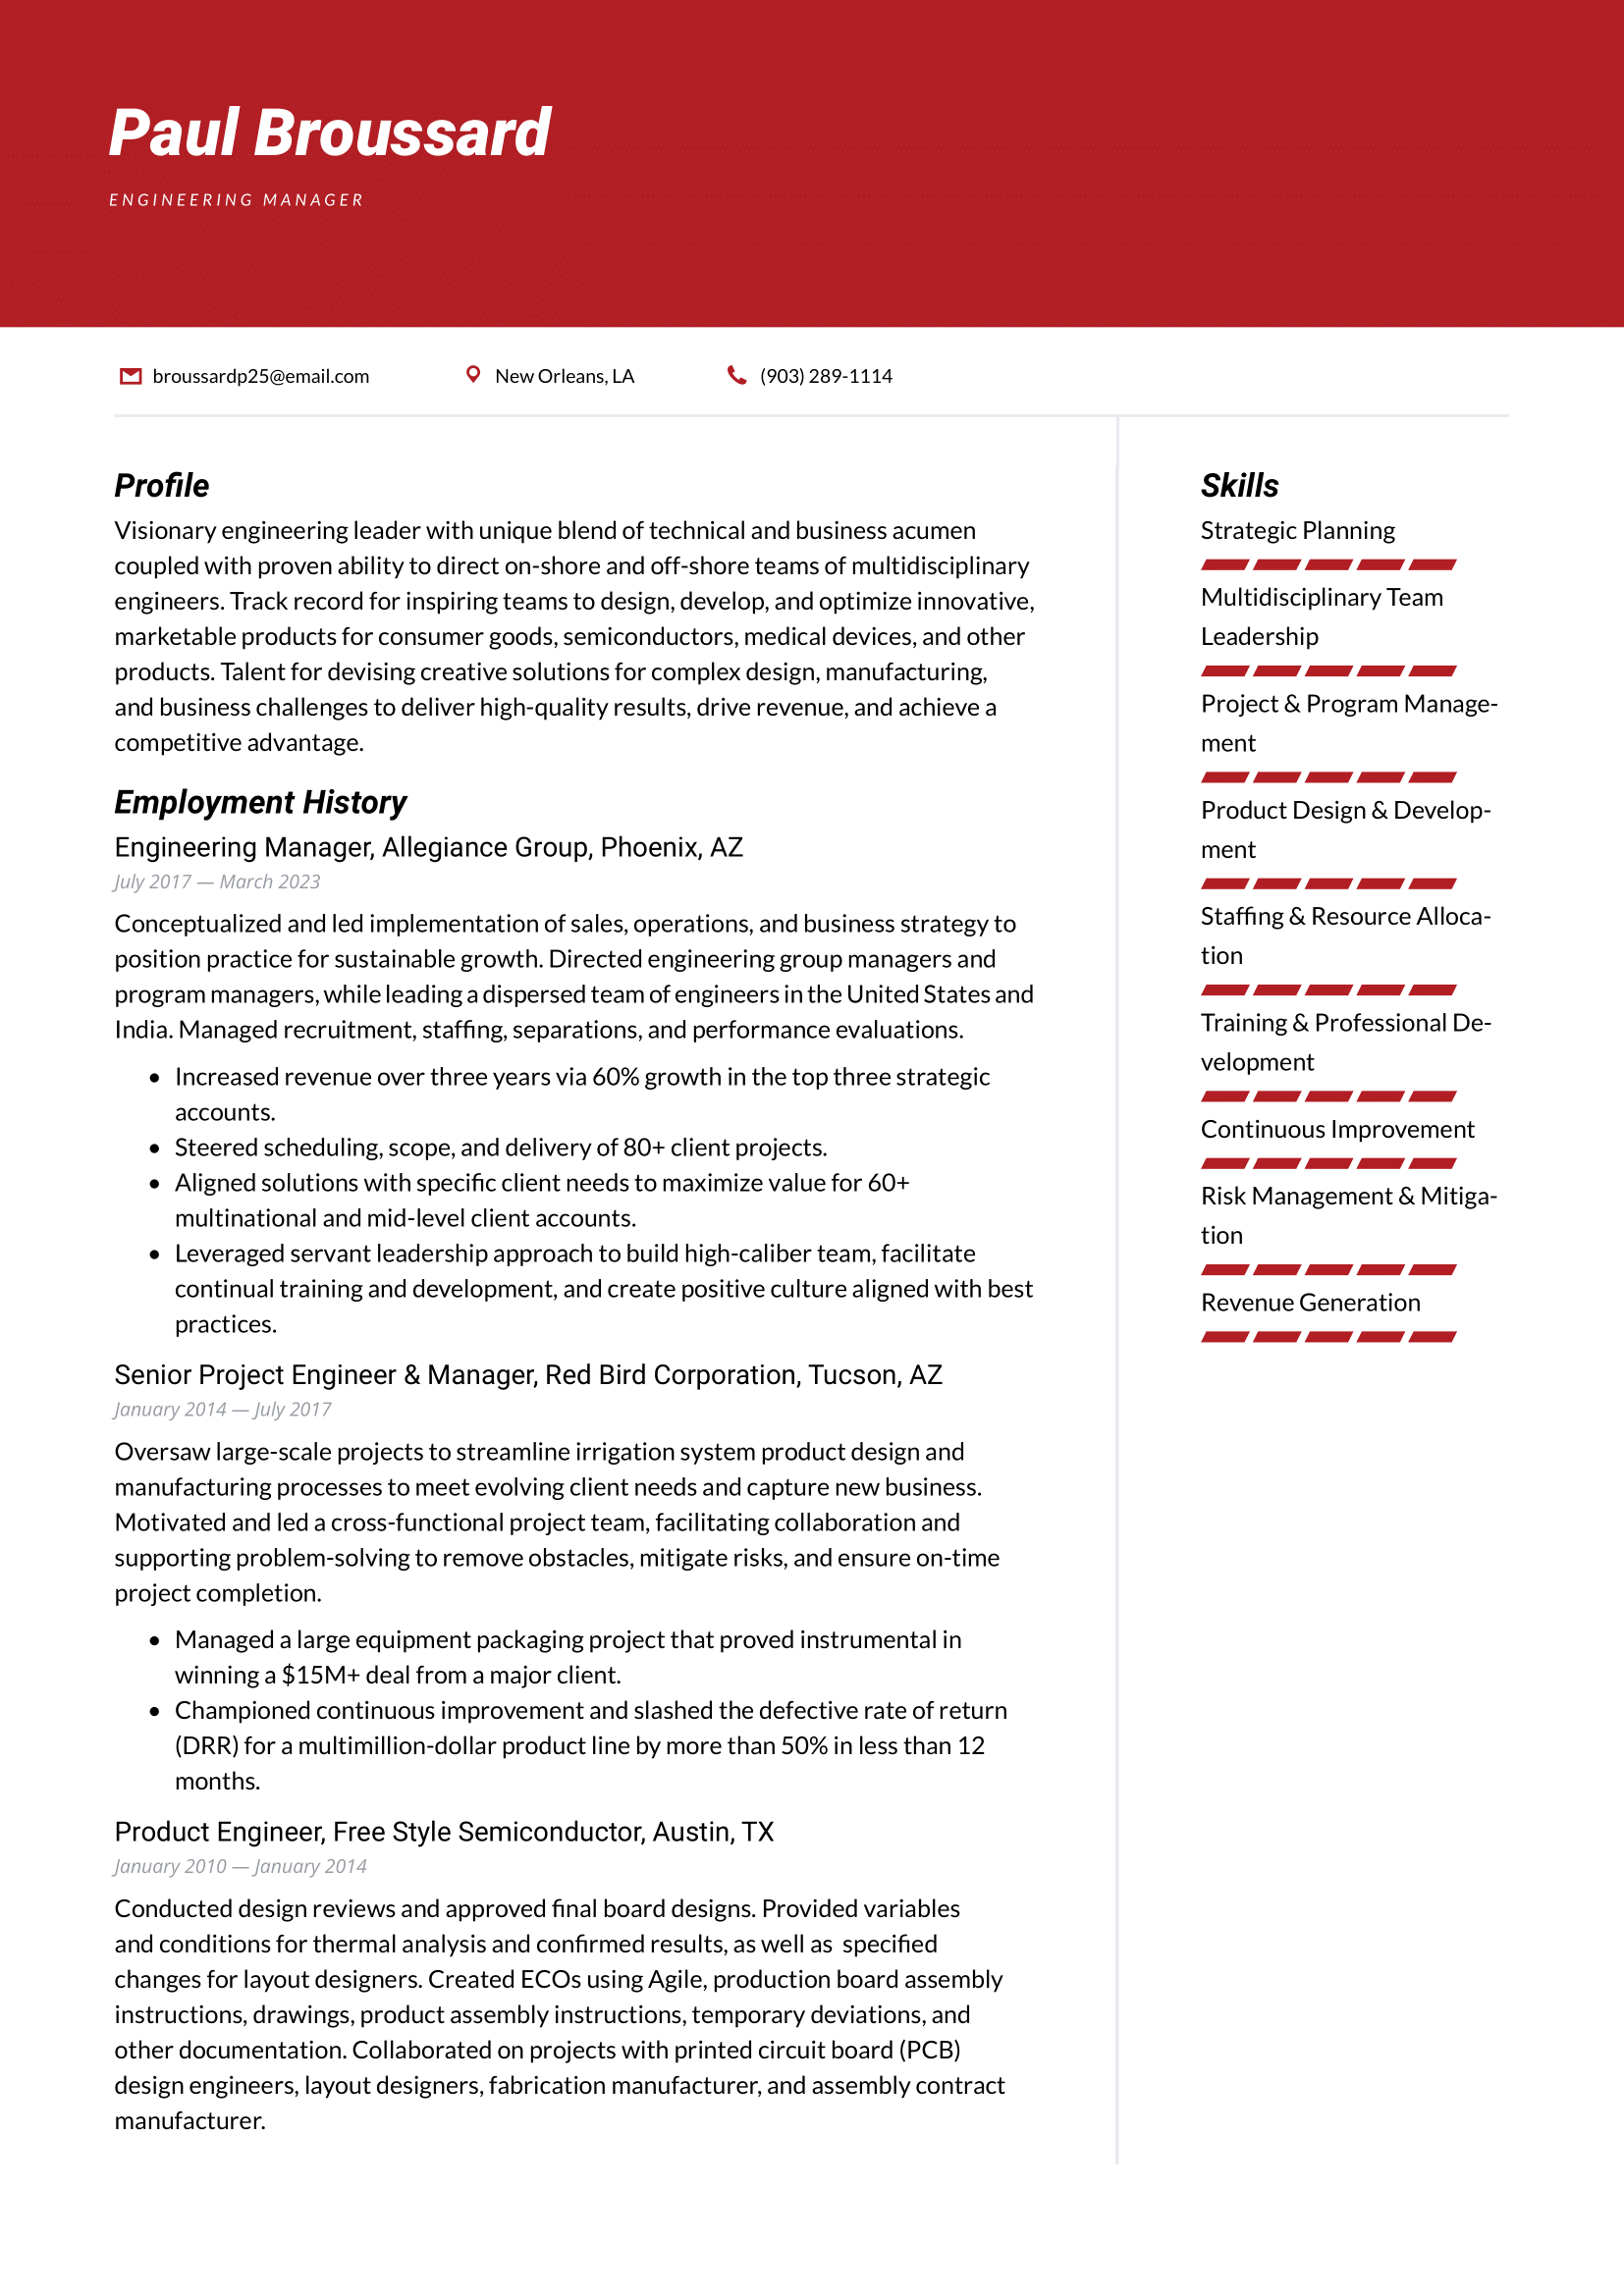 Engineering_Manager_Resume-Example1 1.png